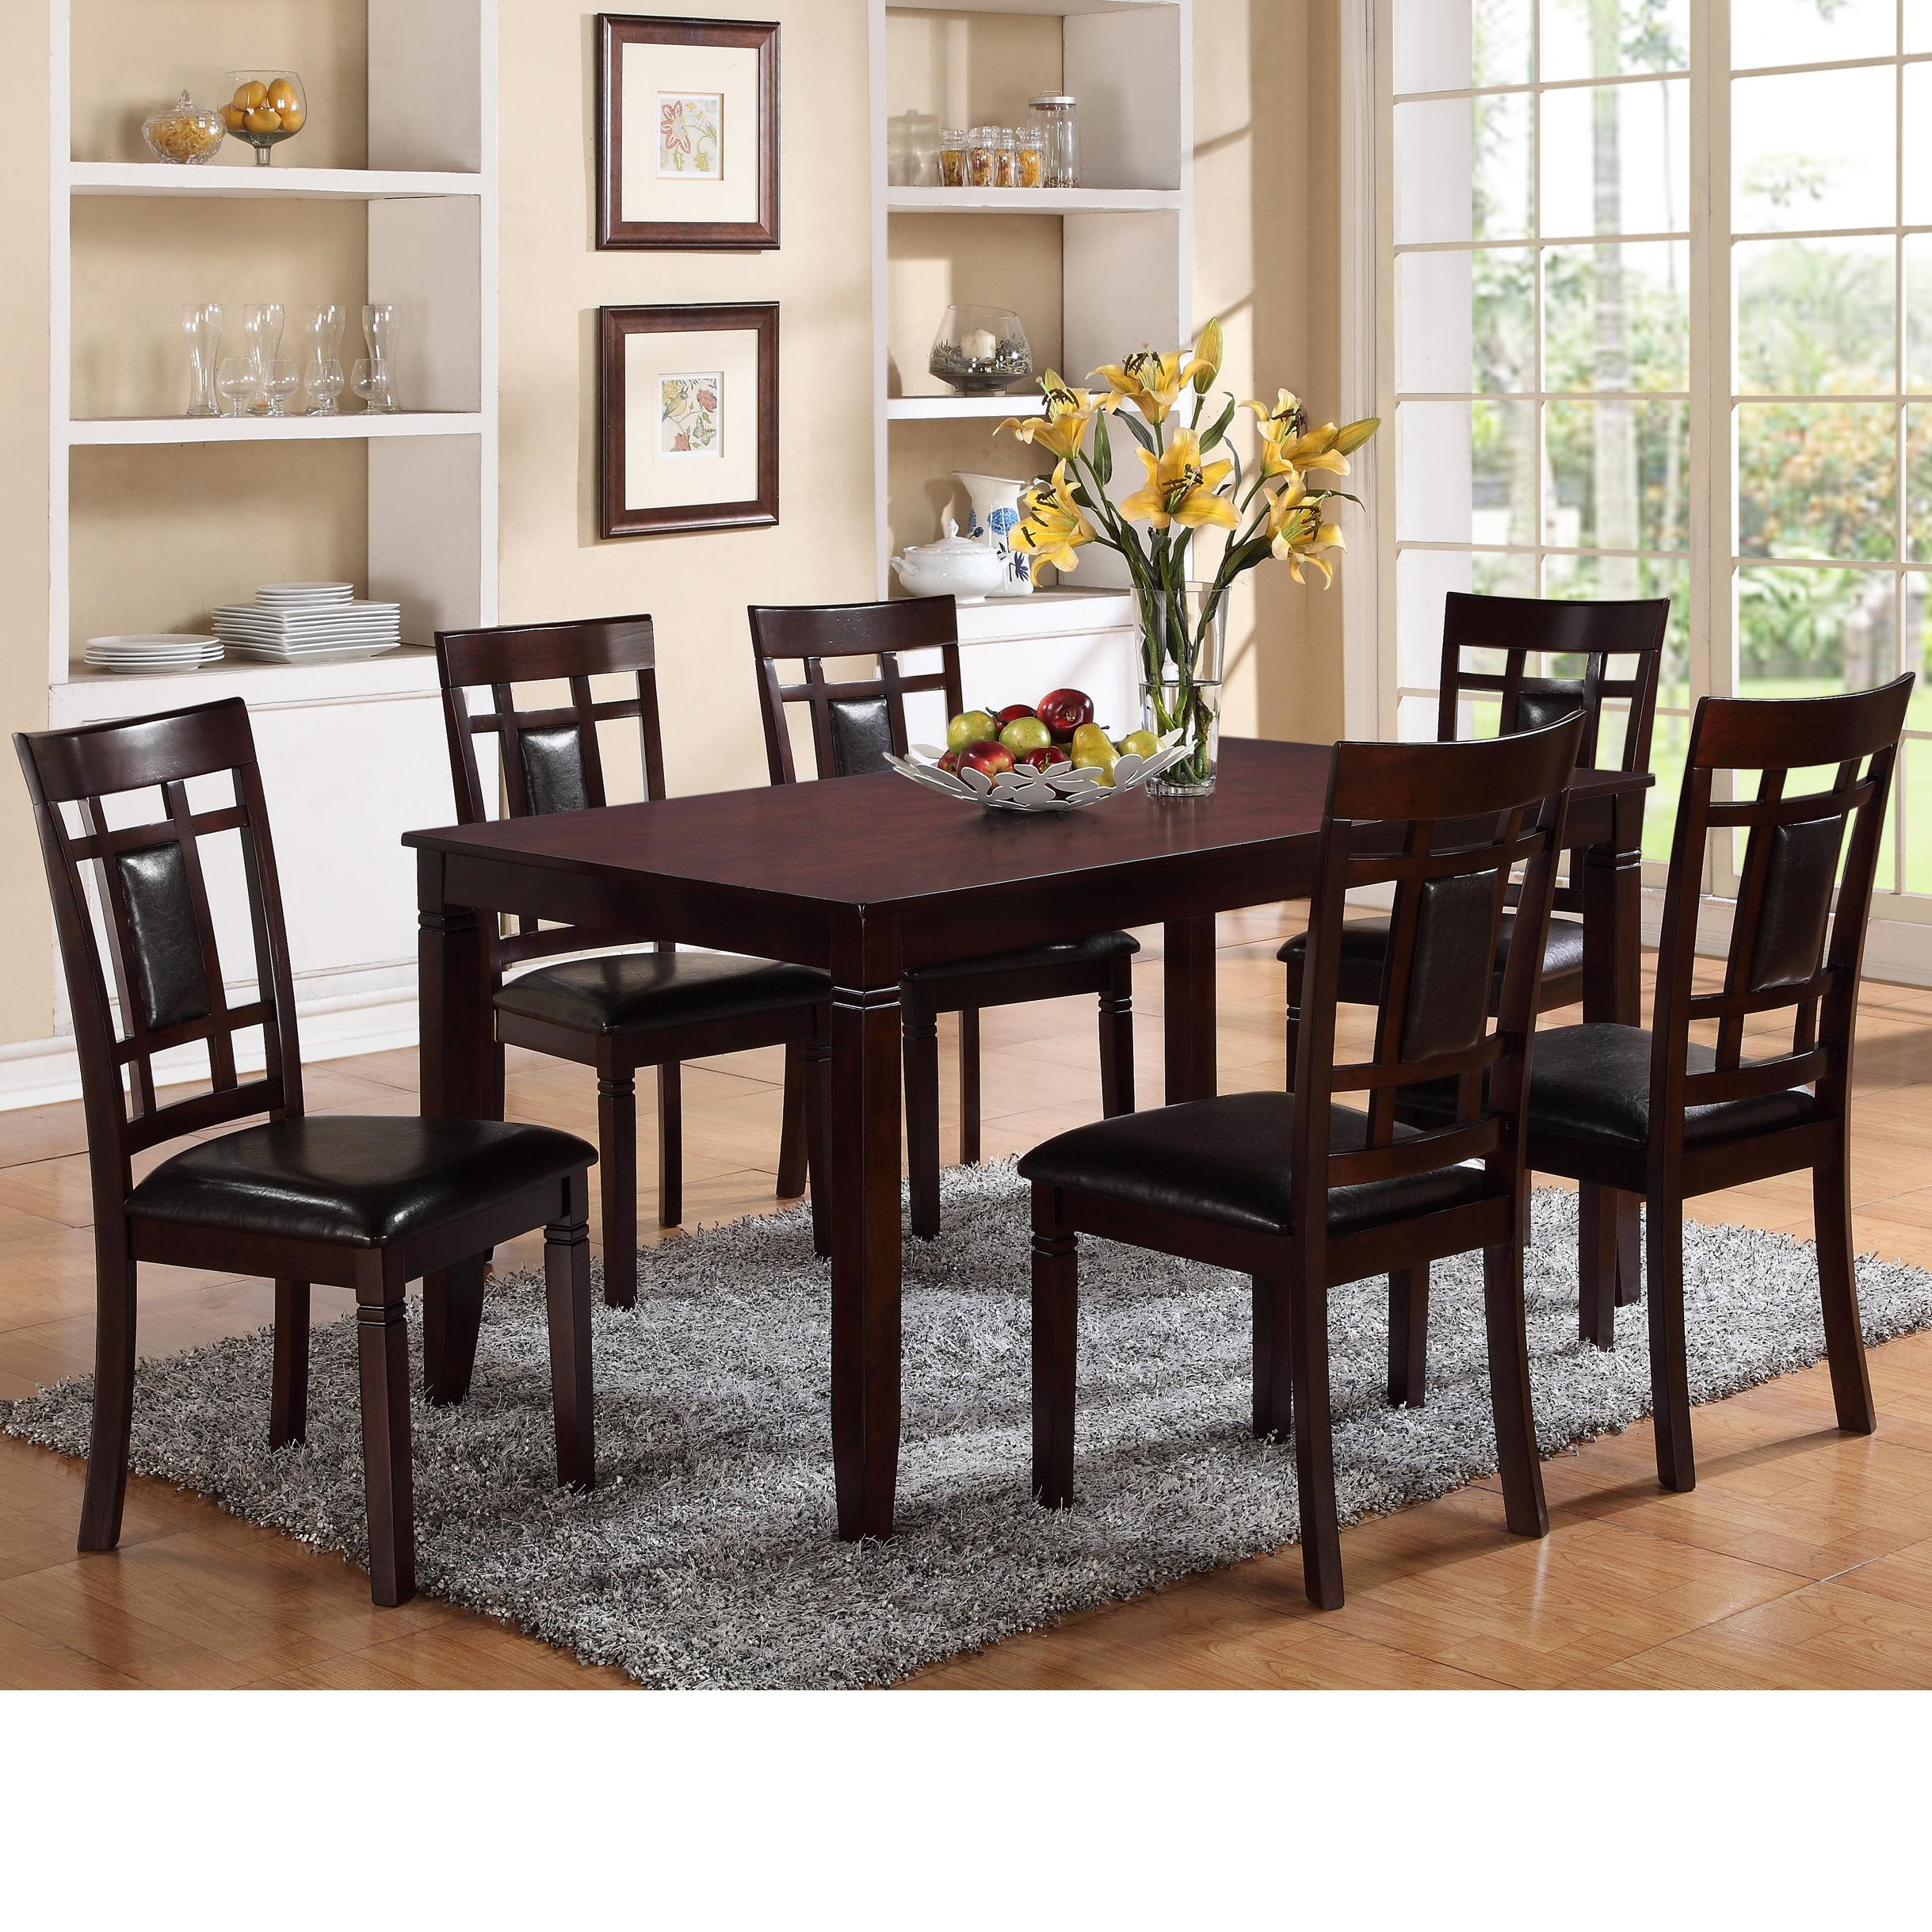 Paige 7 Piece Table And Chair Set regarding size 2438 X 2438